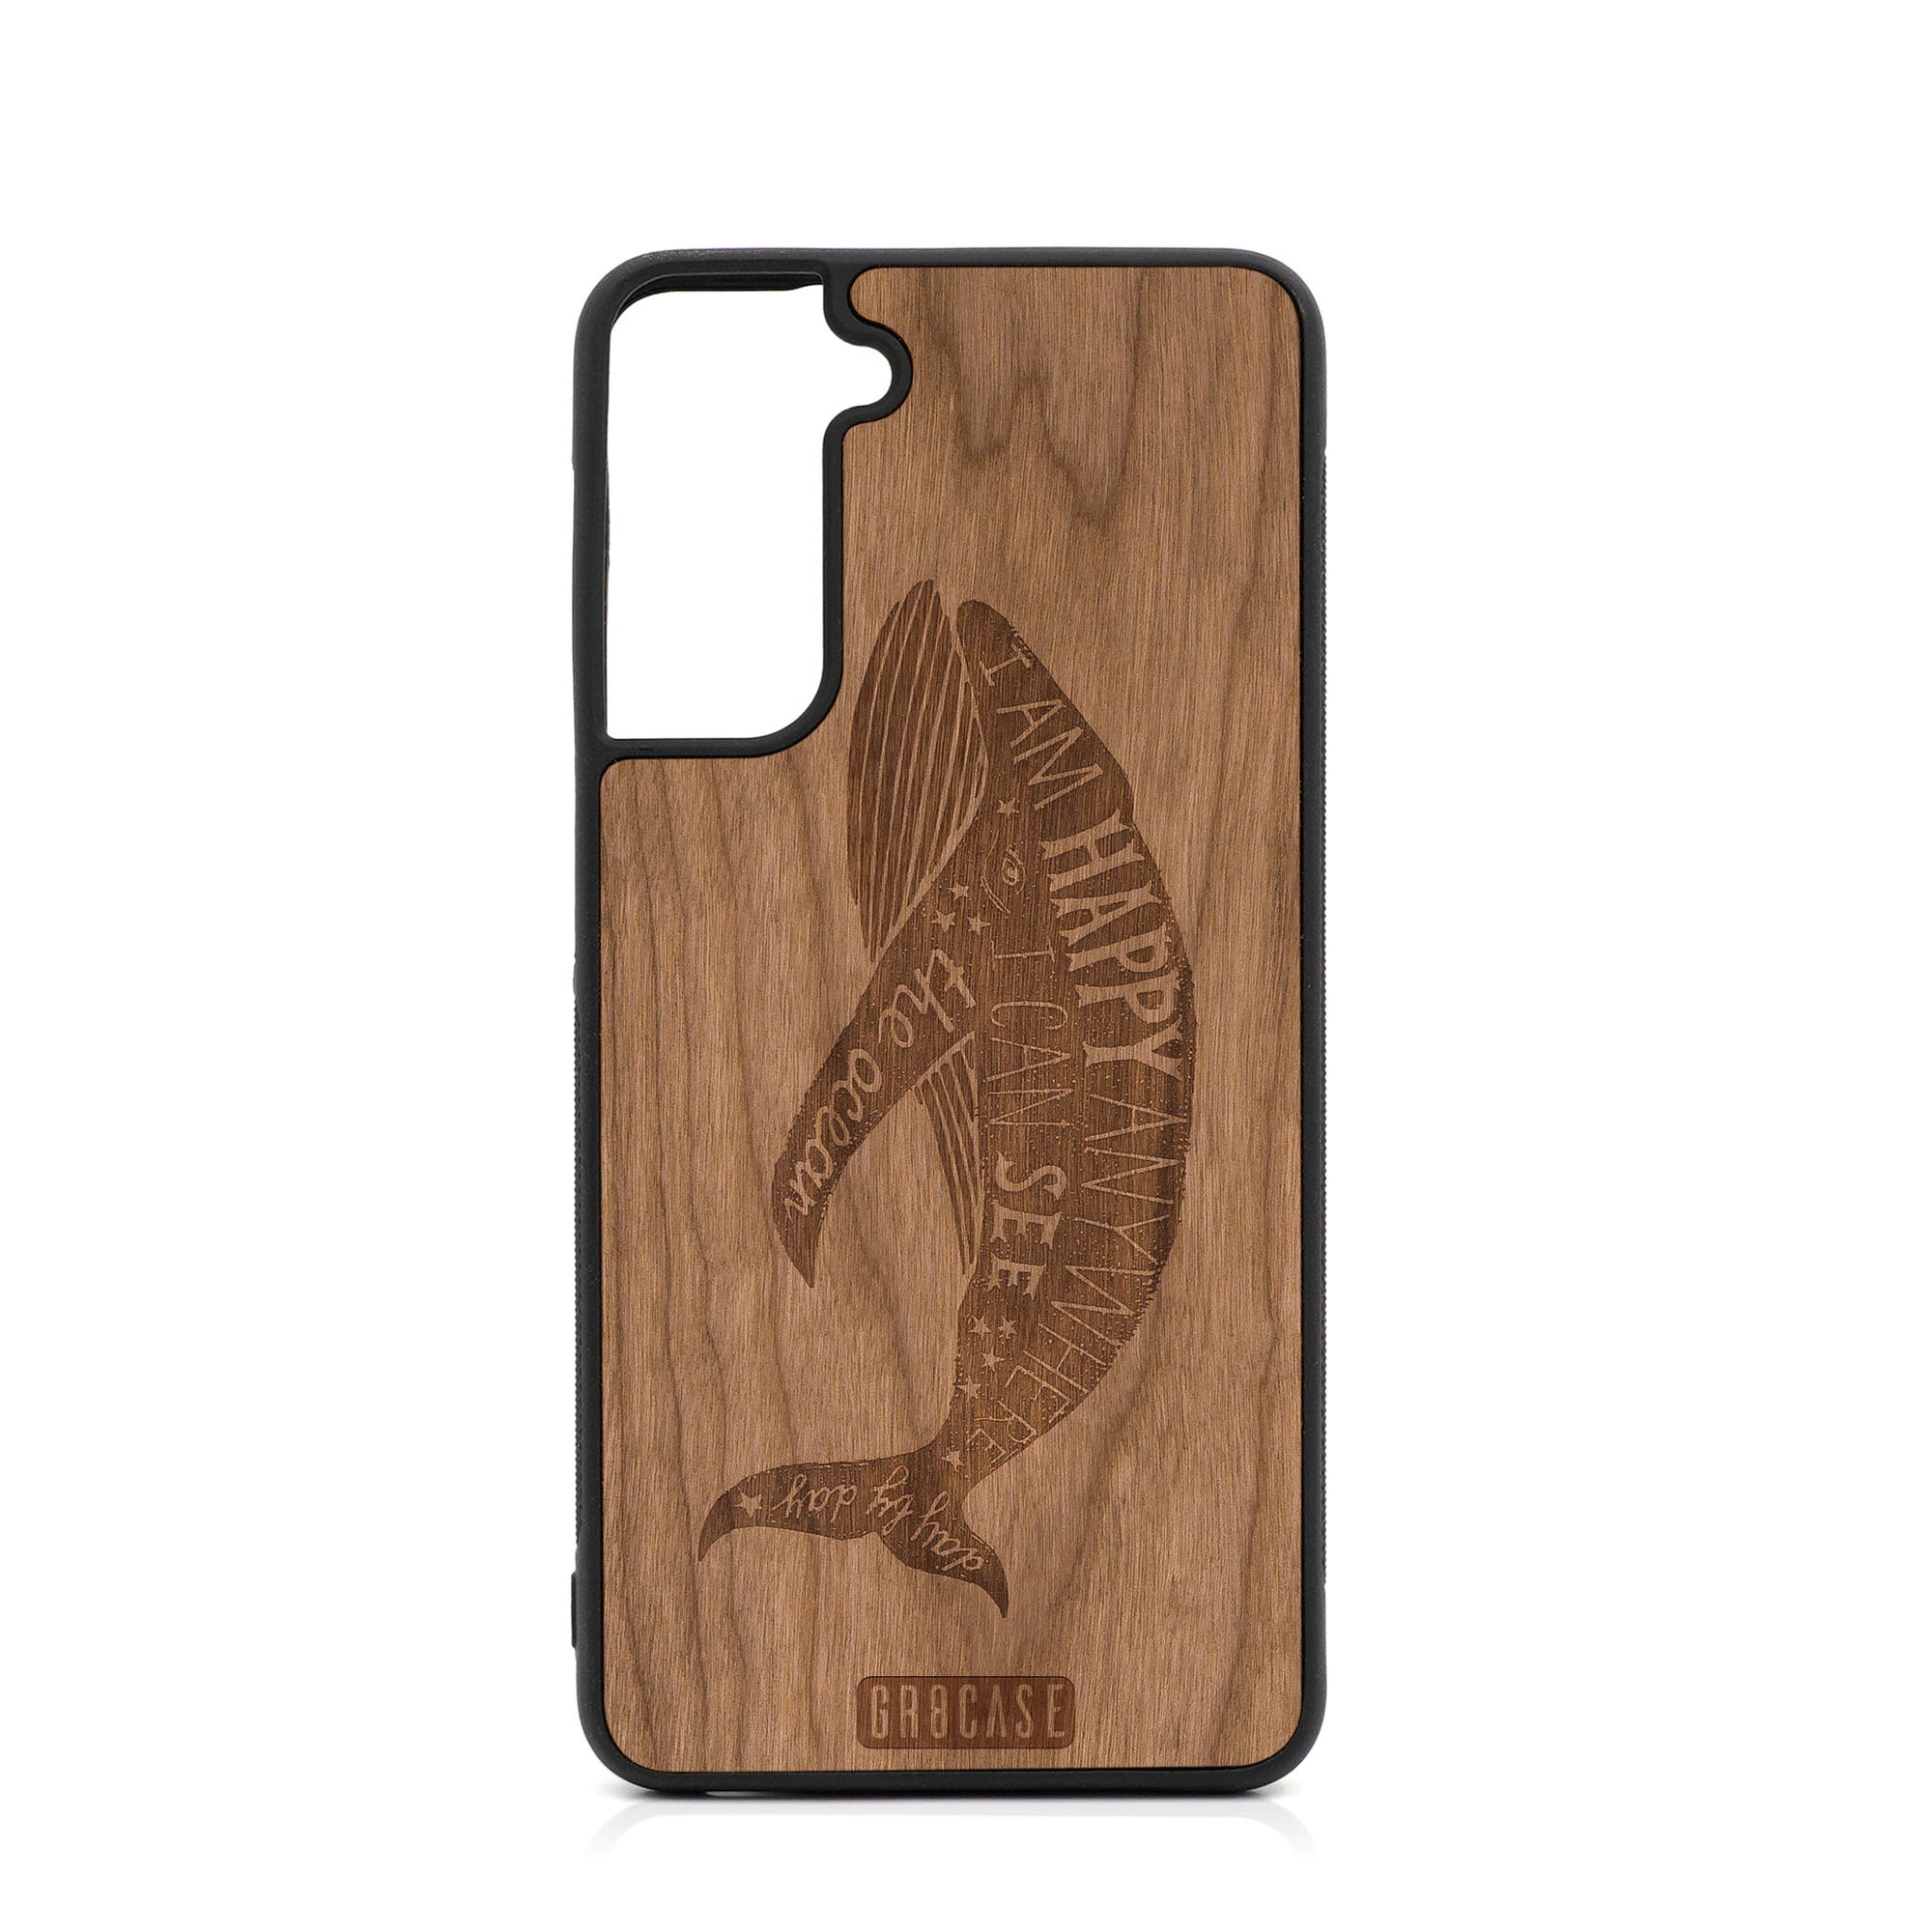 I'm Happy Anywhere I Can See The Ocean (Whale) Design Wood Case For Samsung Galaxy S21 Plus 5G